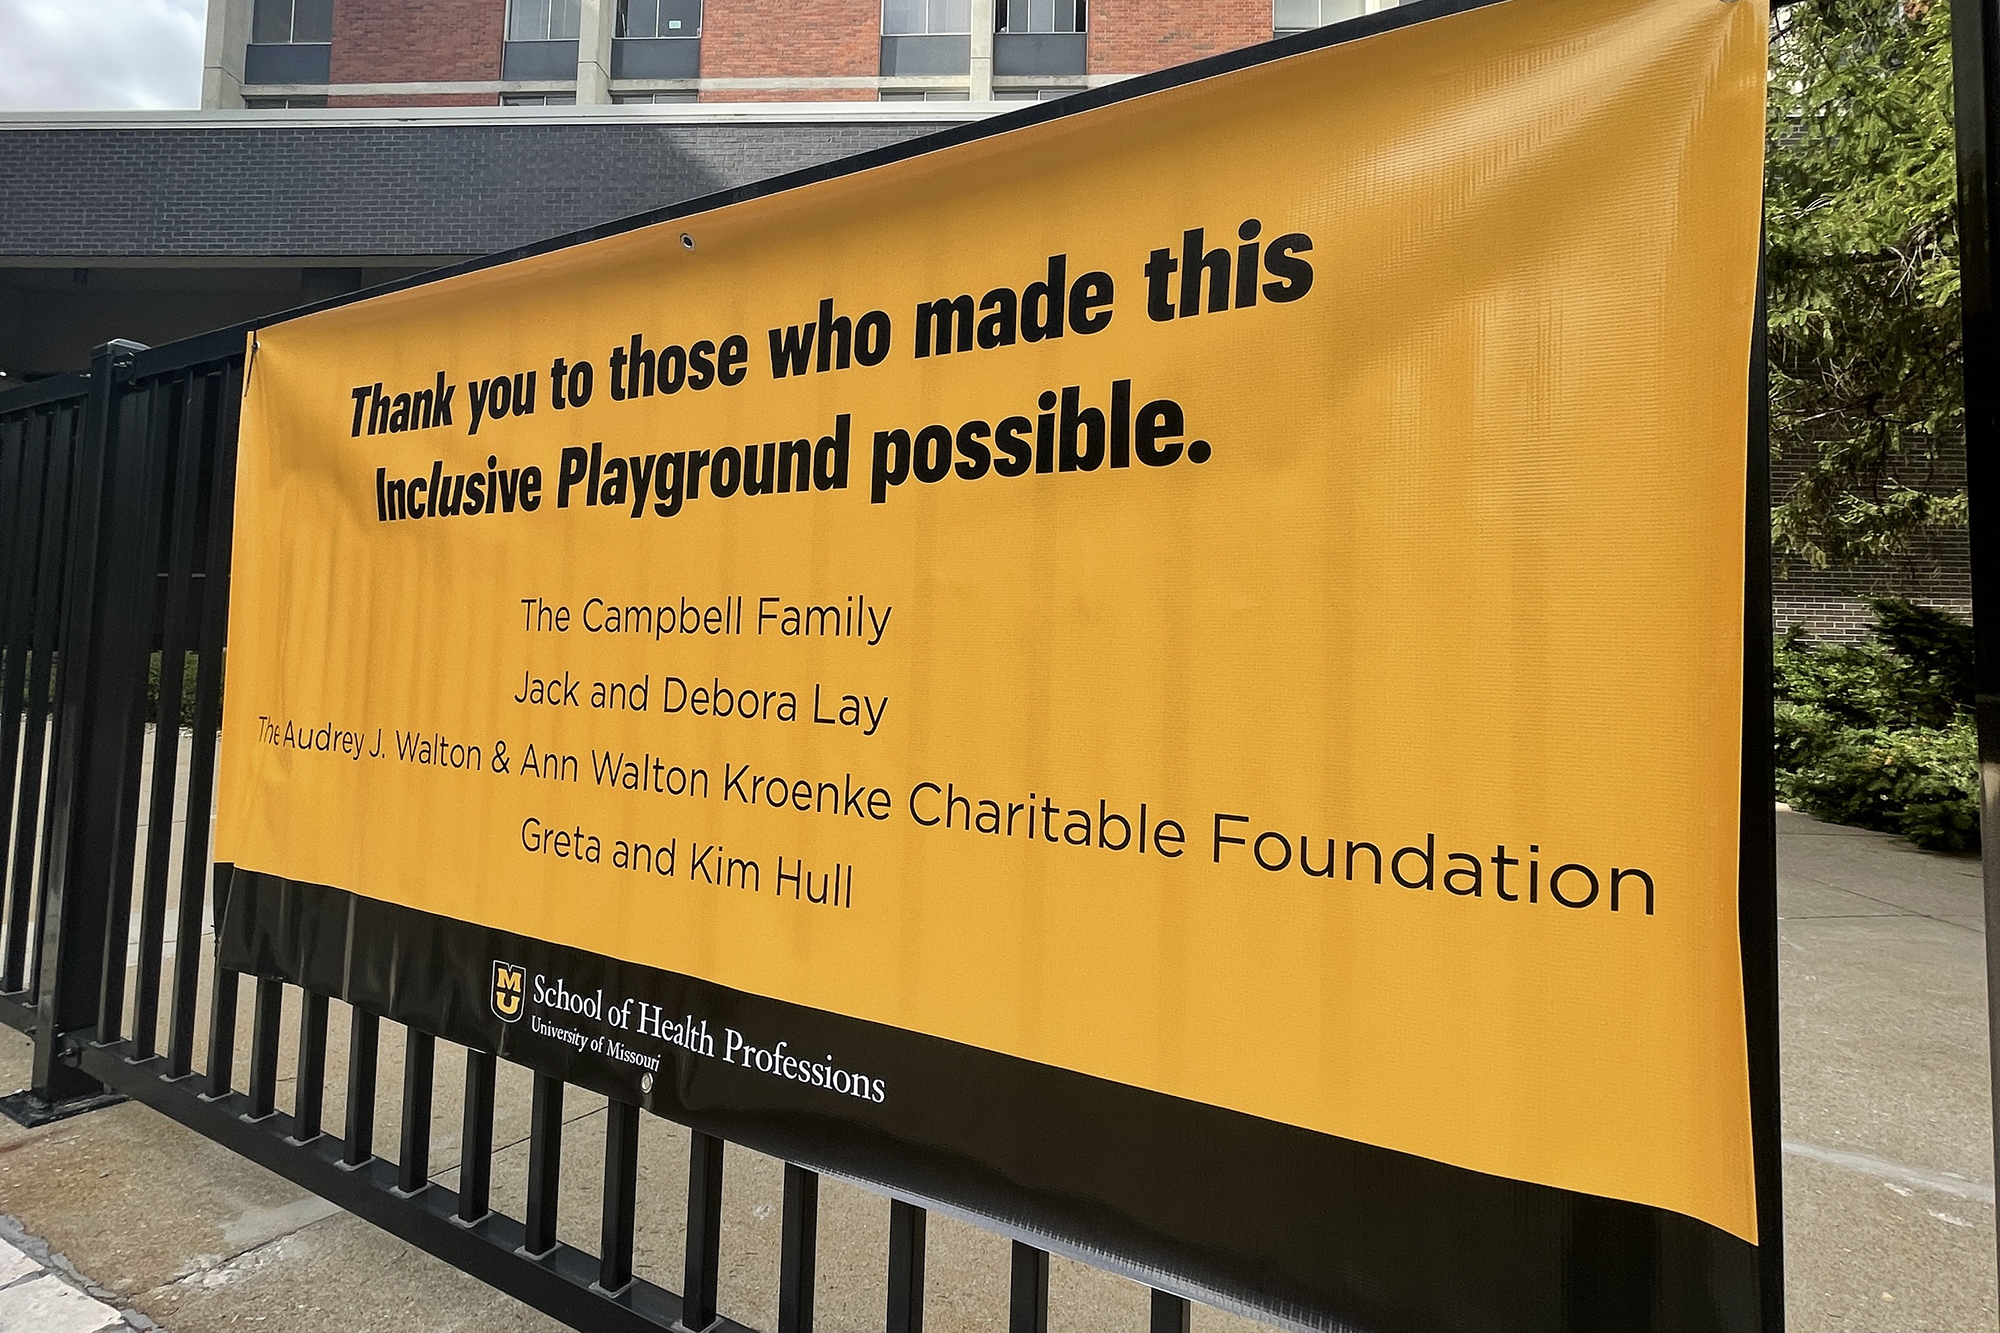 a sign that says "thank you to those who made this inclusive playground possible" and lists "the campbell family, jack and debora lay, the audrey j. walton & ann walton kroenke charitable foundation, greta and kim hull"